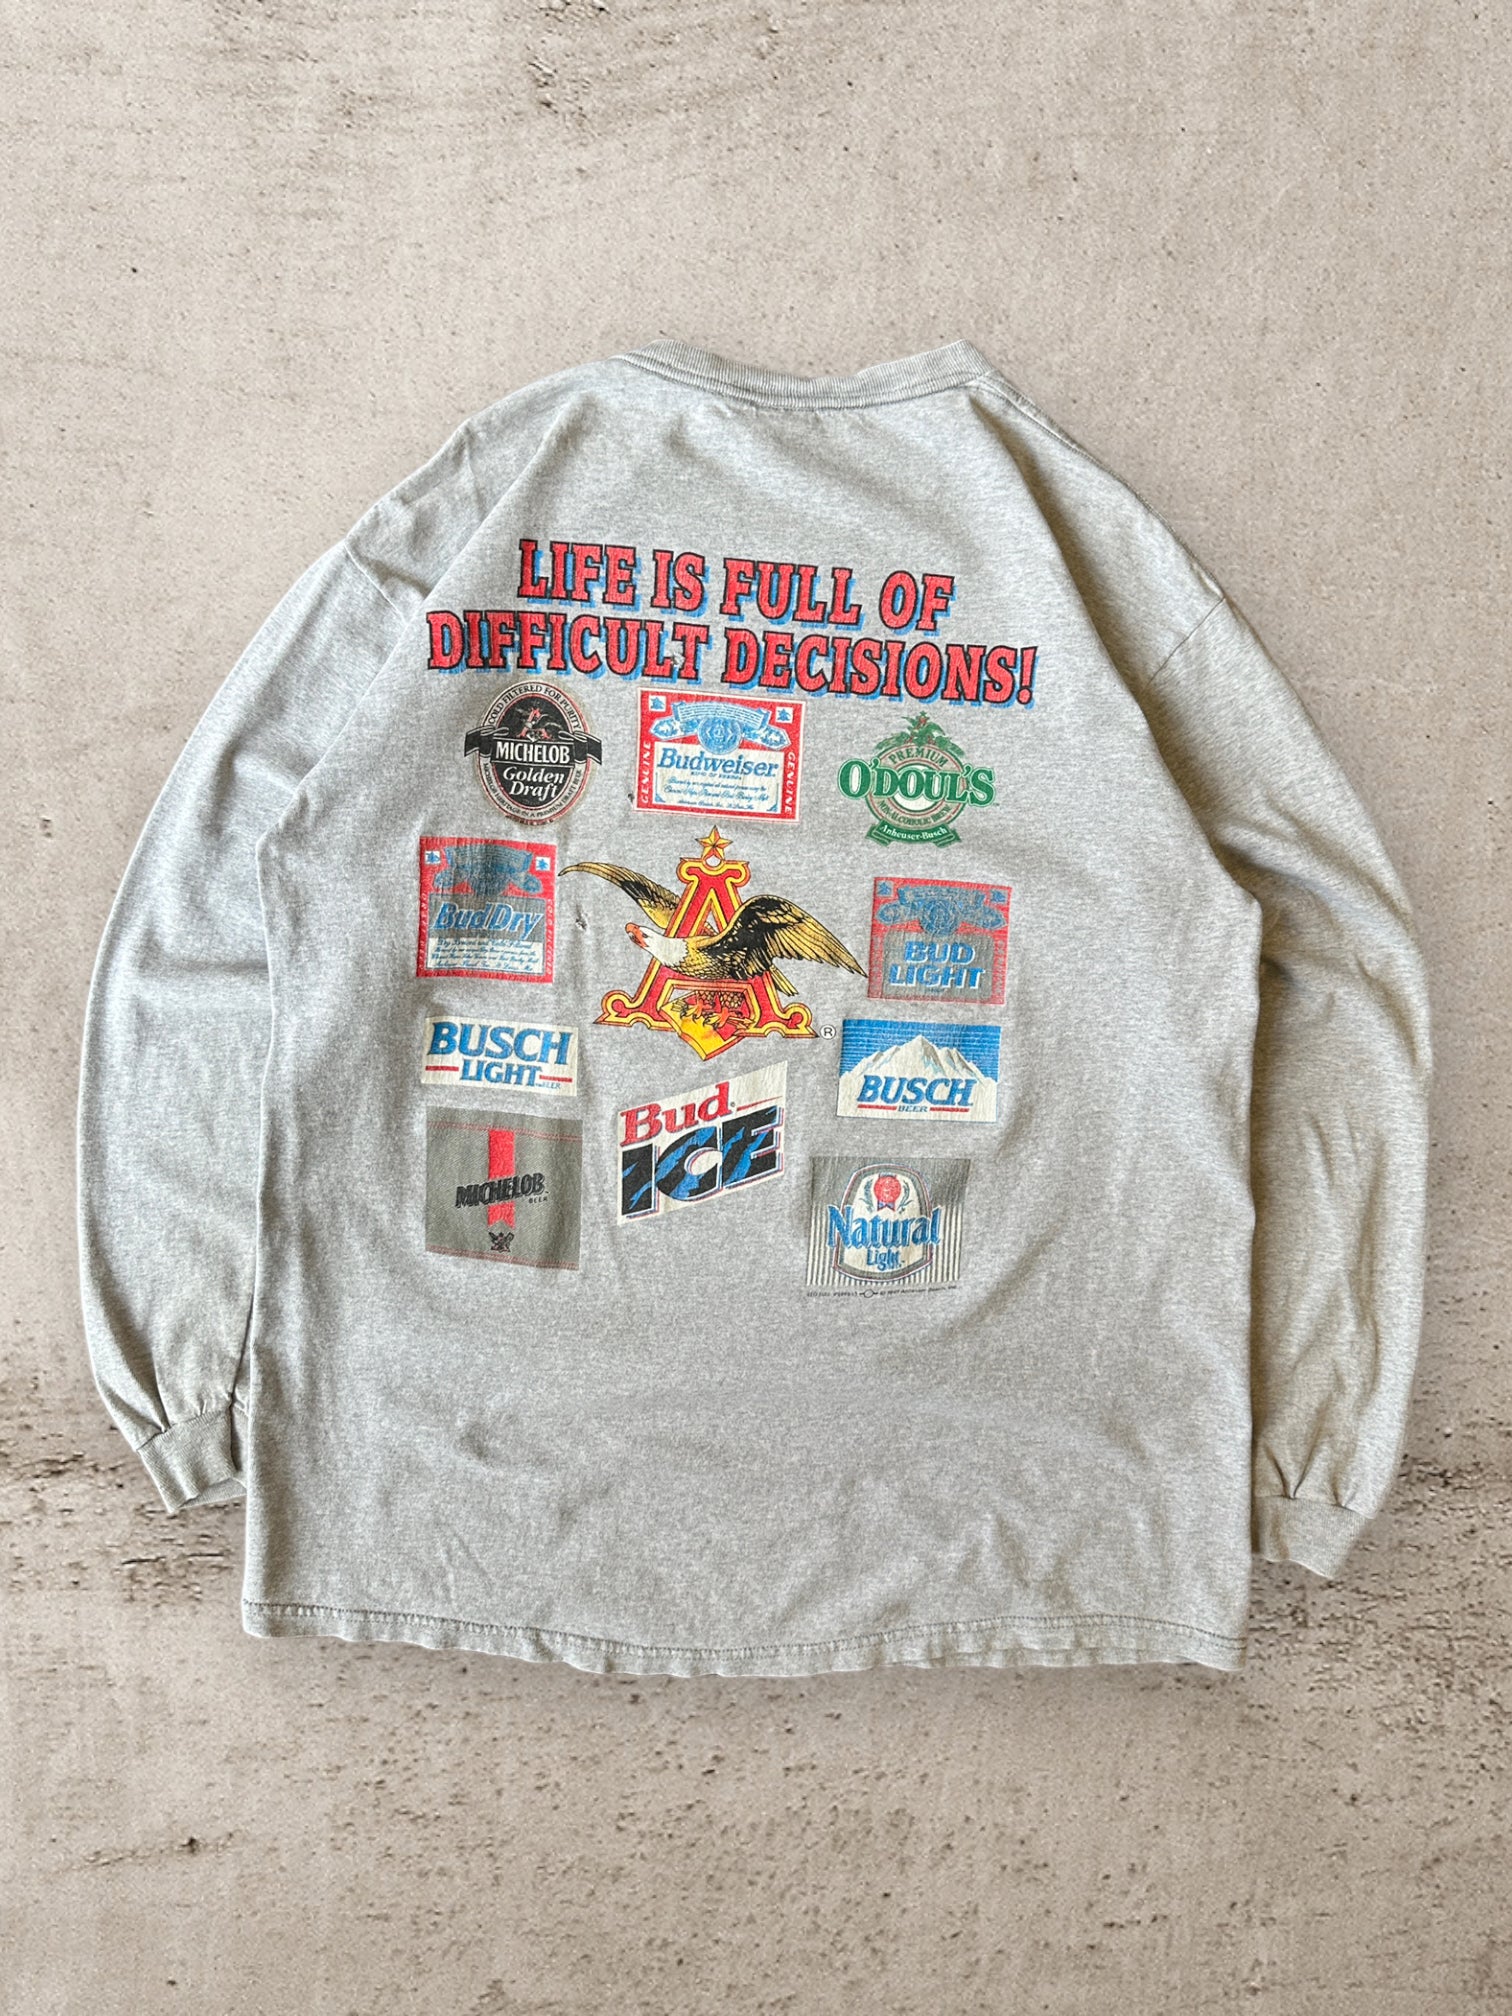 90s Budweiser Life is Full of Difficult Choices Long Sleeve T-Shirt - Large